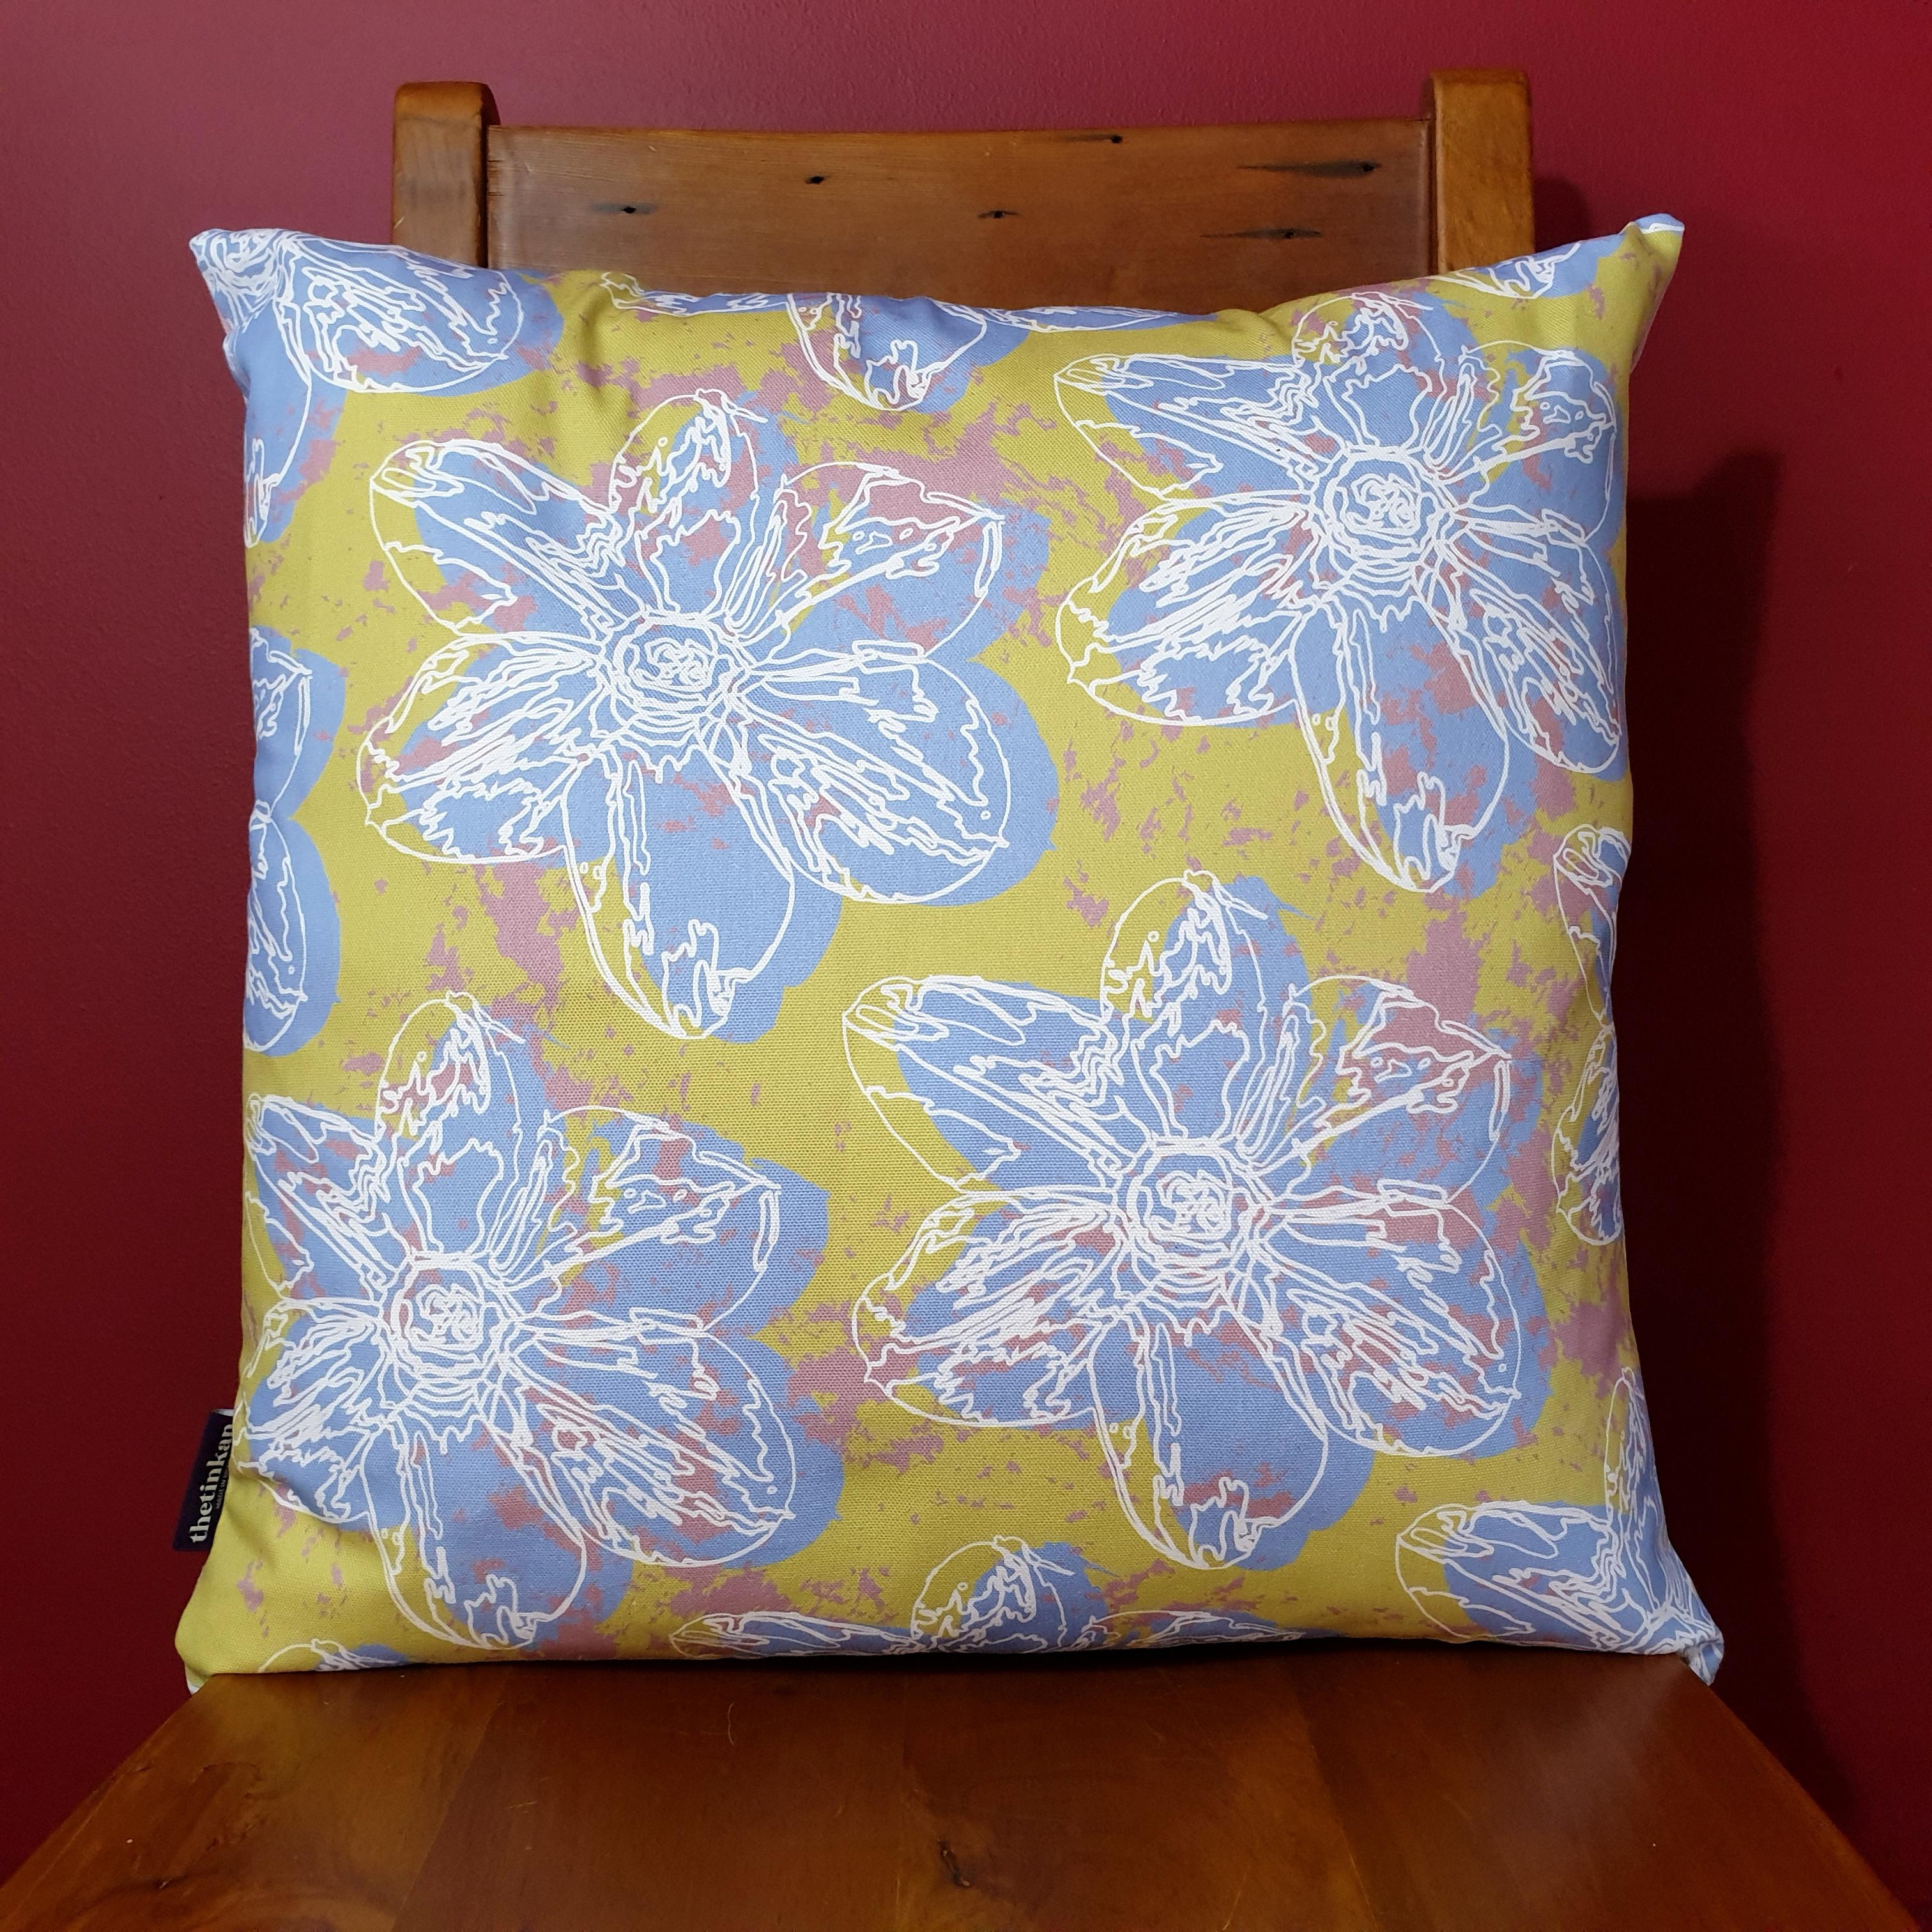 Double-sided 51cm square Flower Splash cushion designed by thetinkan. Pale blue narcissus flower with white traced outline set within a light olive green background with salmon pink paint splashes. Available with an optional luxury cushion inner pad. VIEW PRODUCT >>